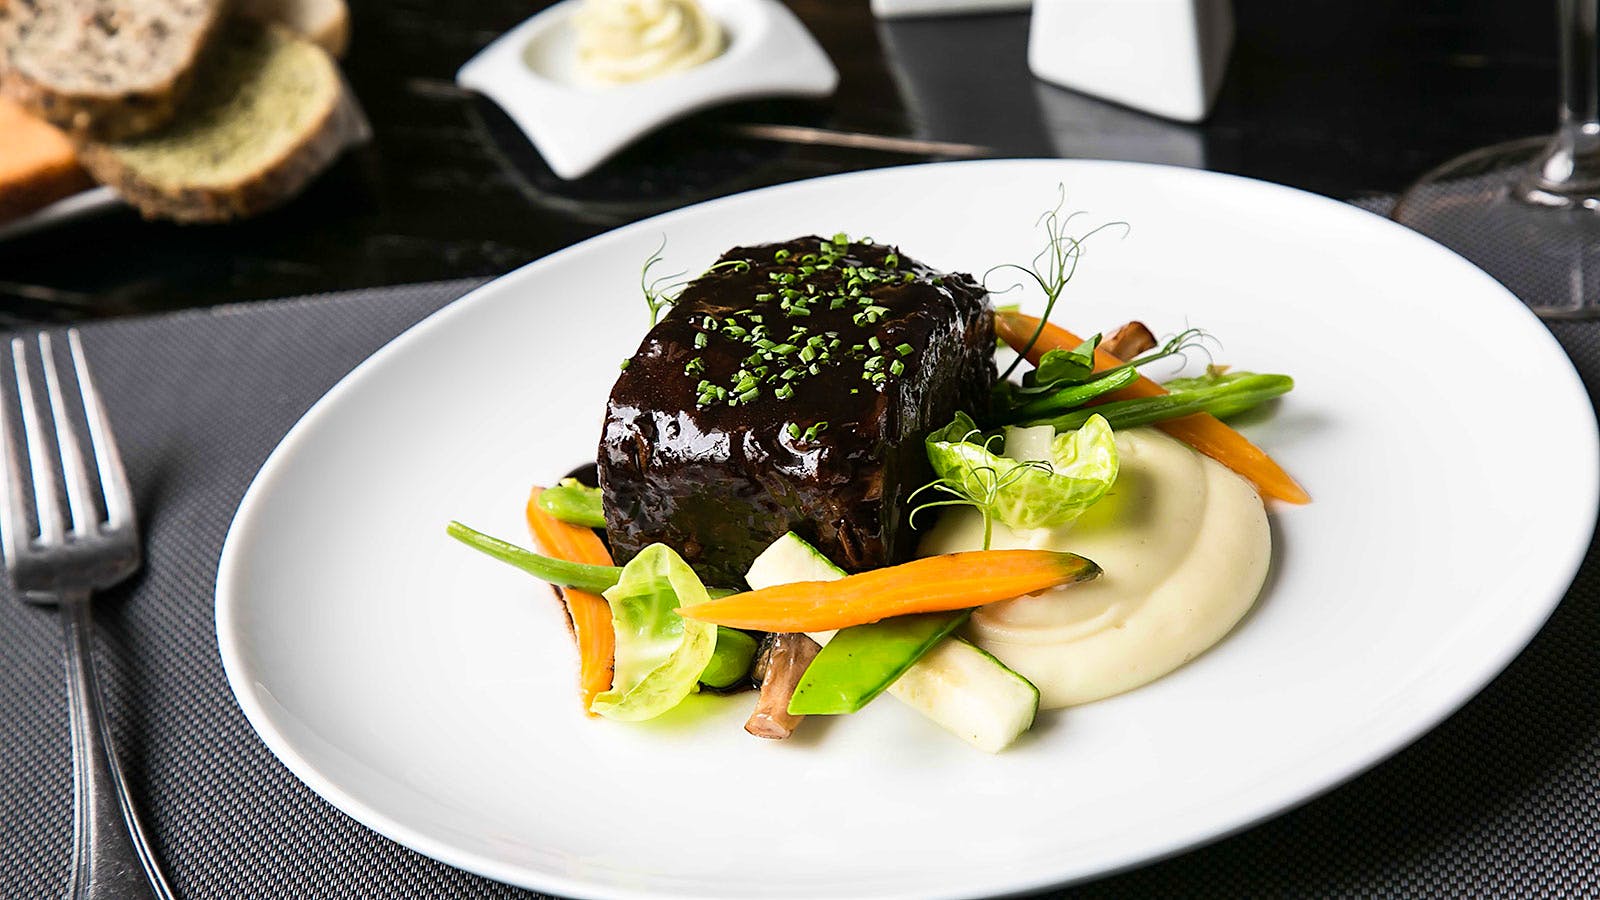 Short rib, mashed potato and vegetables at Eloise Chic Cuisine